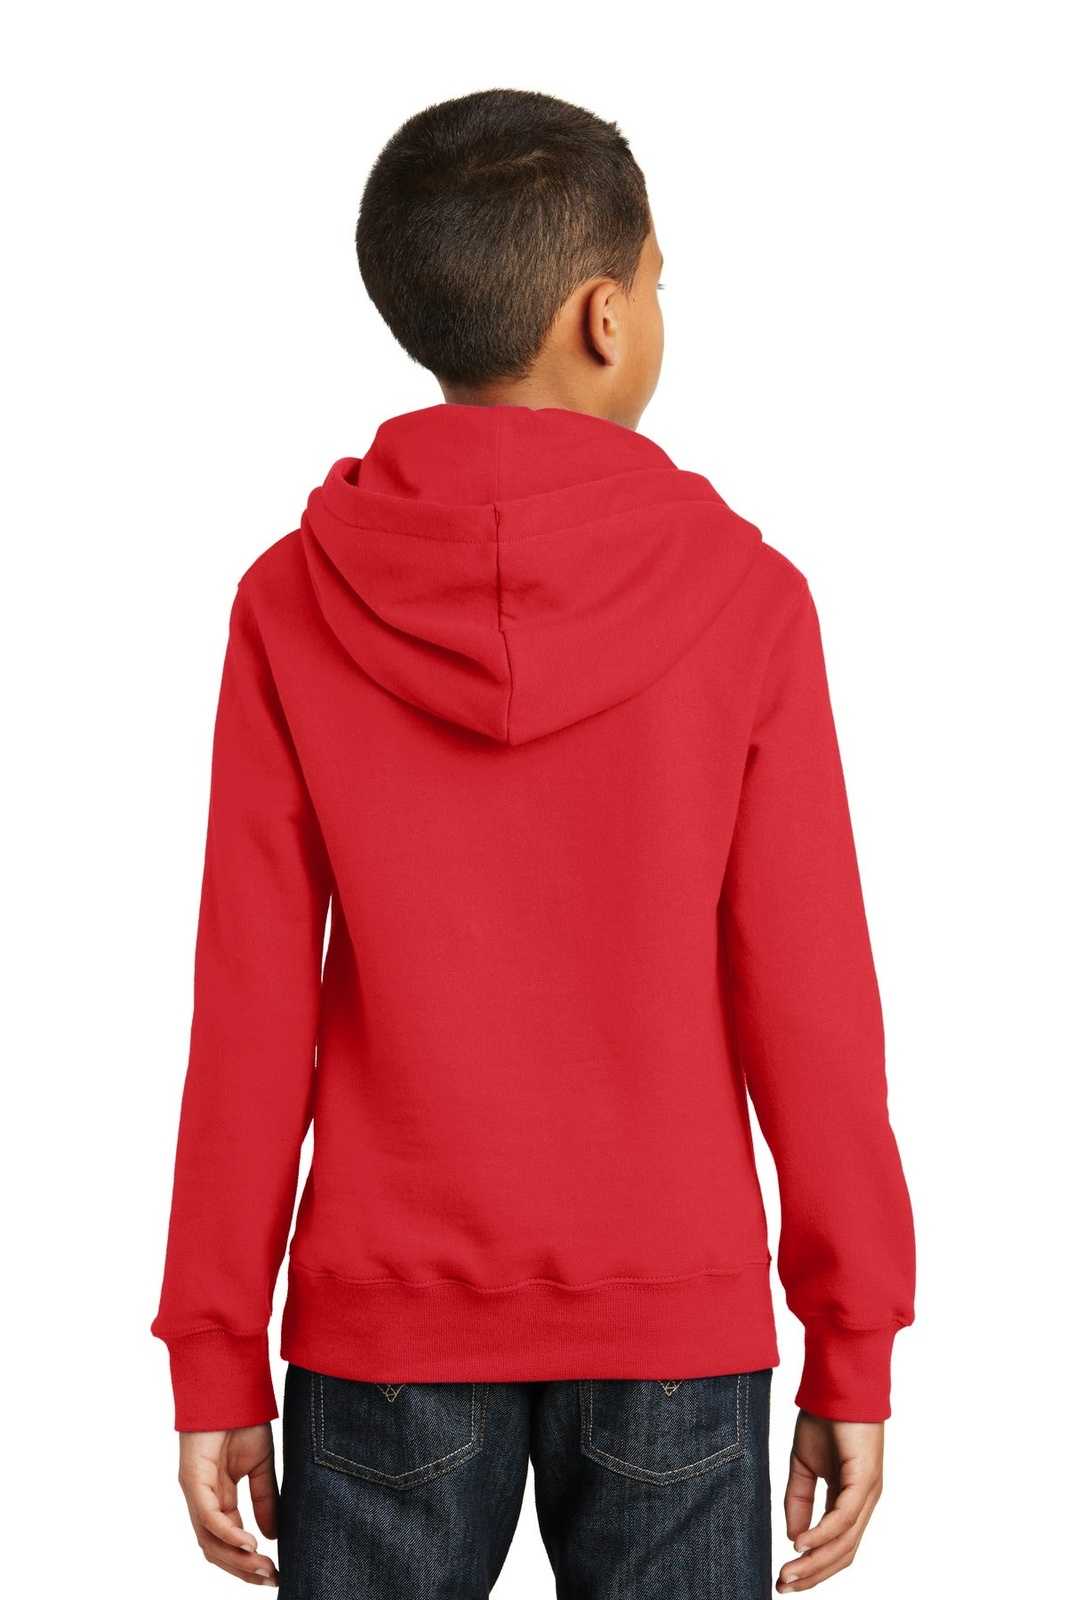 Port & Company PC850YH Youth Fan Favorite Fleece Pullover Hooded Sweatshirt - Bright Red - HIT a Double - 1